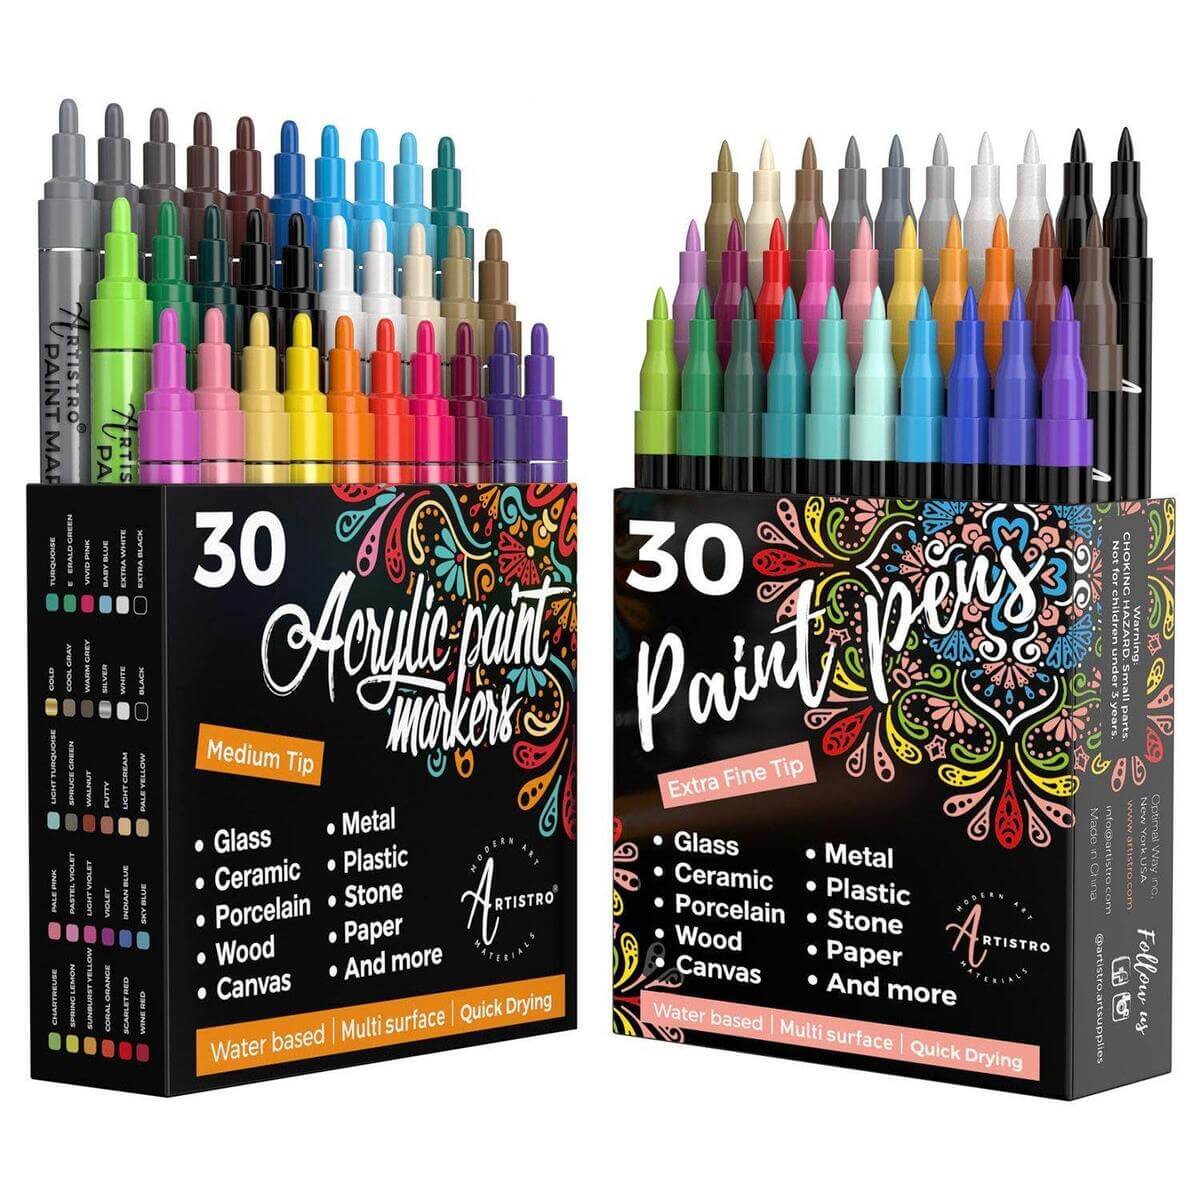 30 Artistro Paint Pens 15 Oil Based Markers 15 Water Based Markers